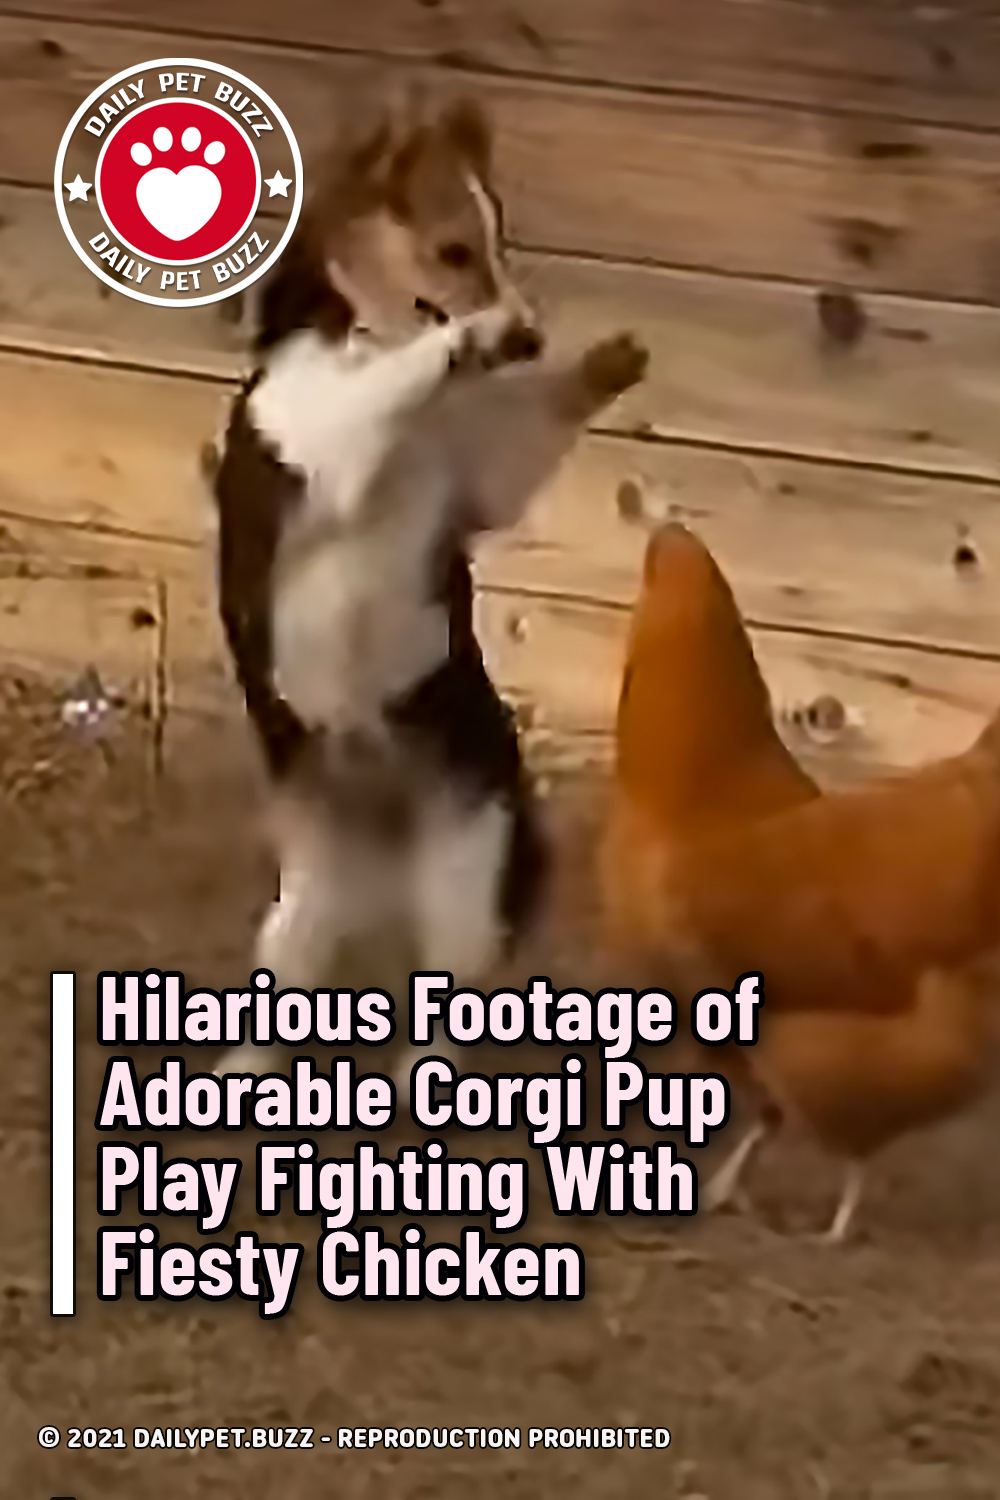 Hilarious Footage of Adorable Corgi Pup Play Fighting With Fiesty Chicken